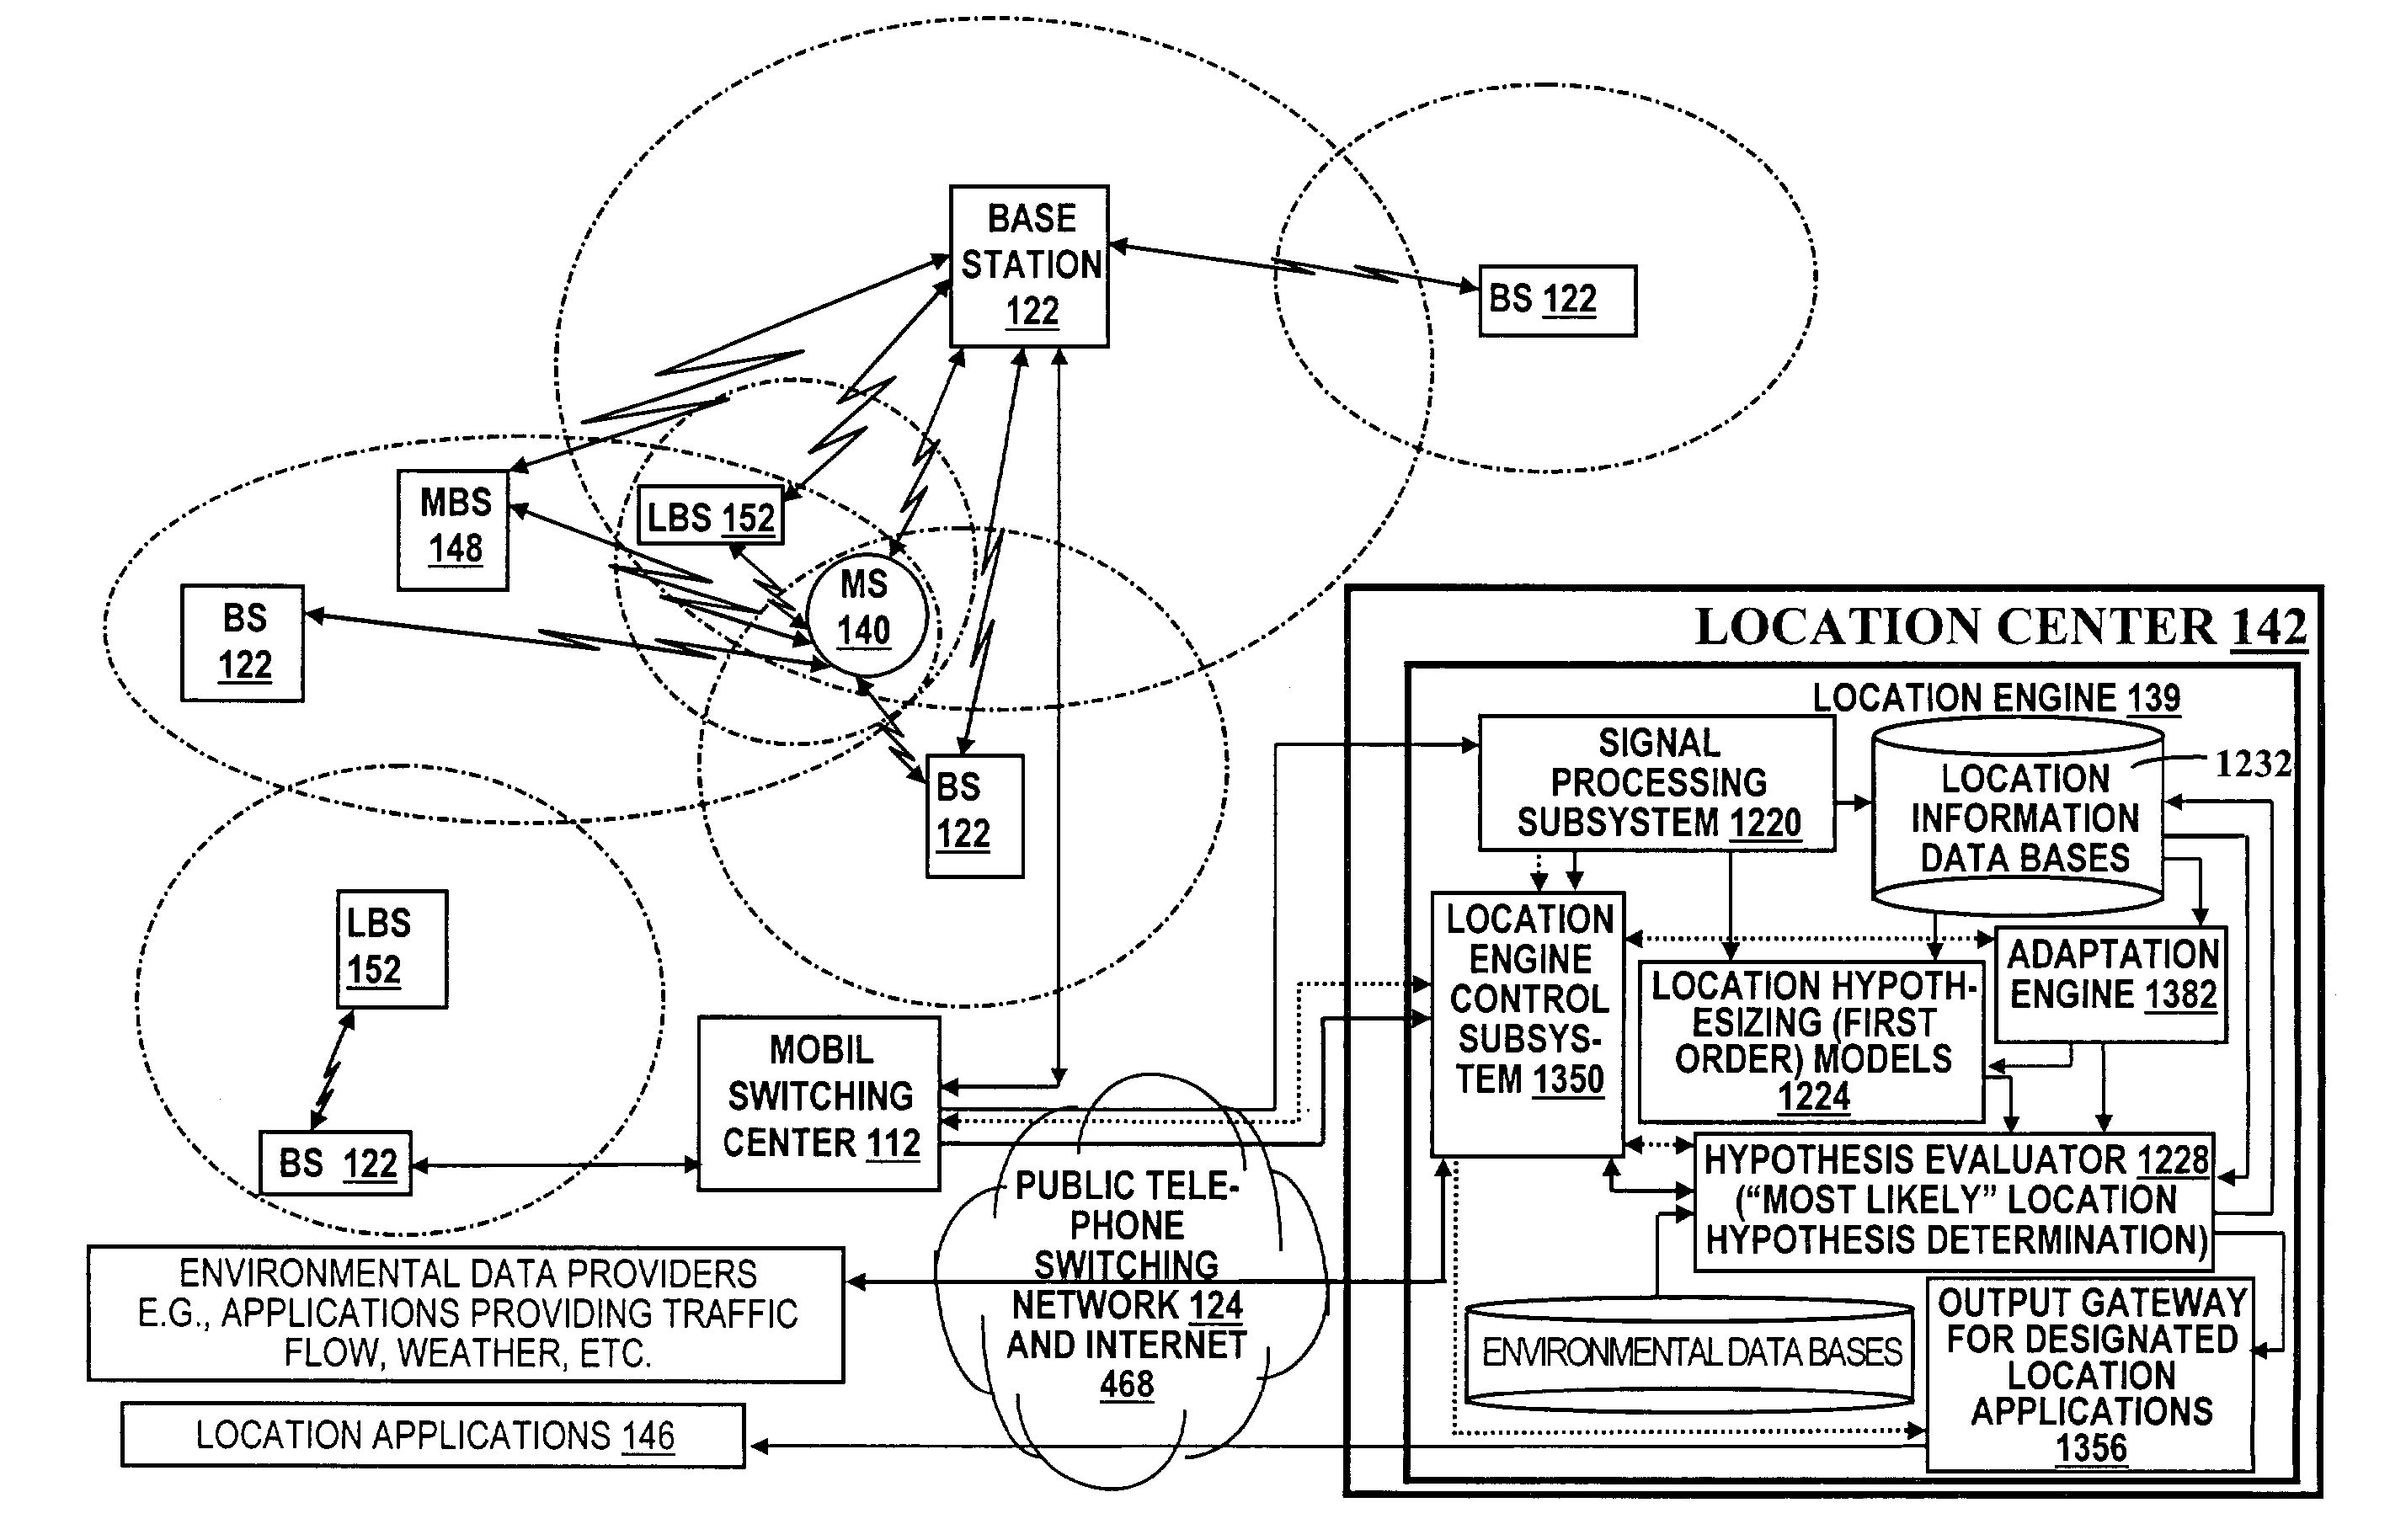 Applications for a wireless location gateway